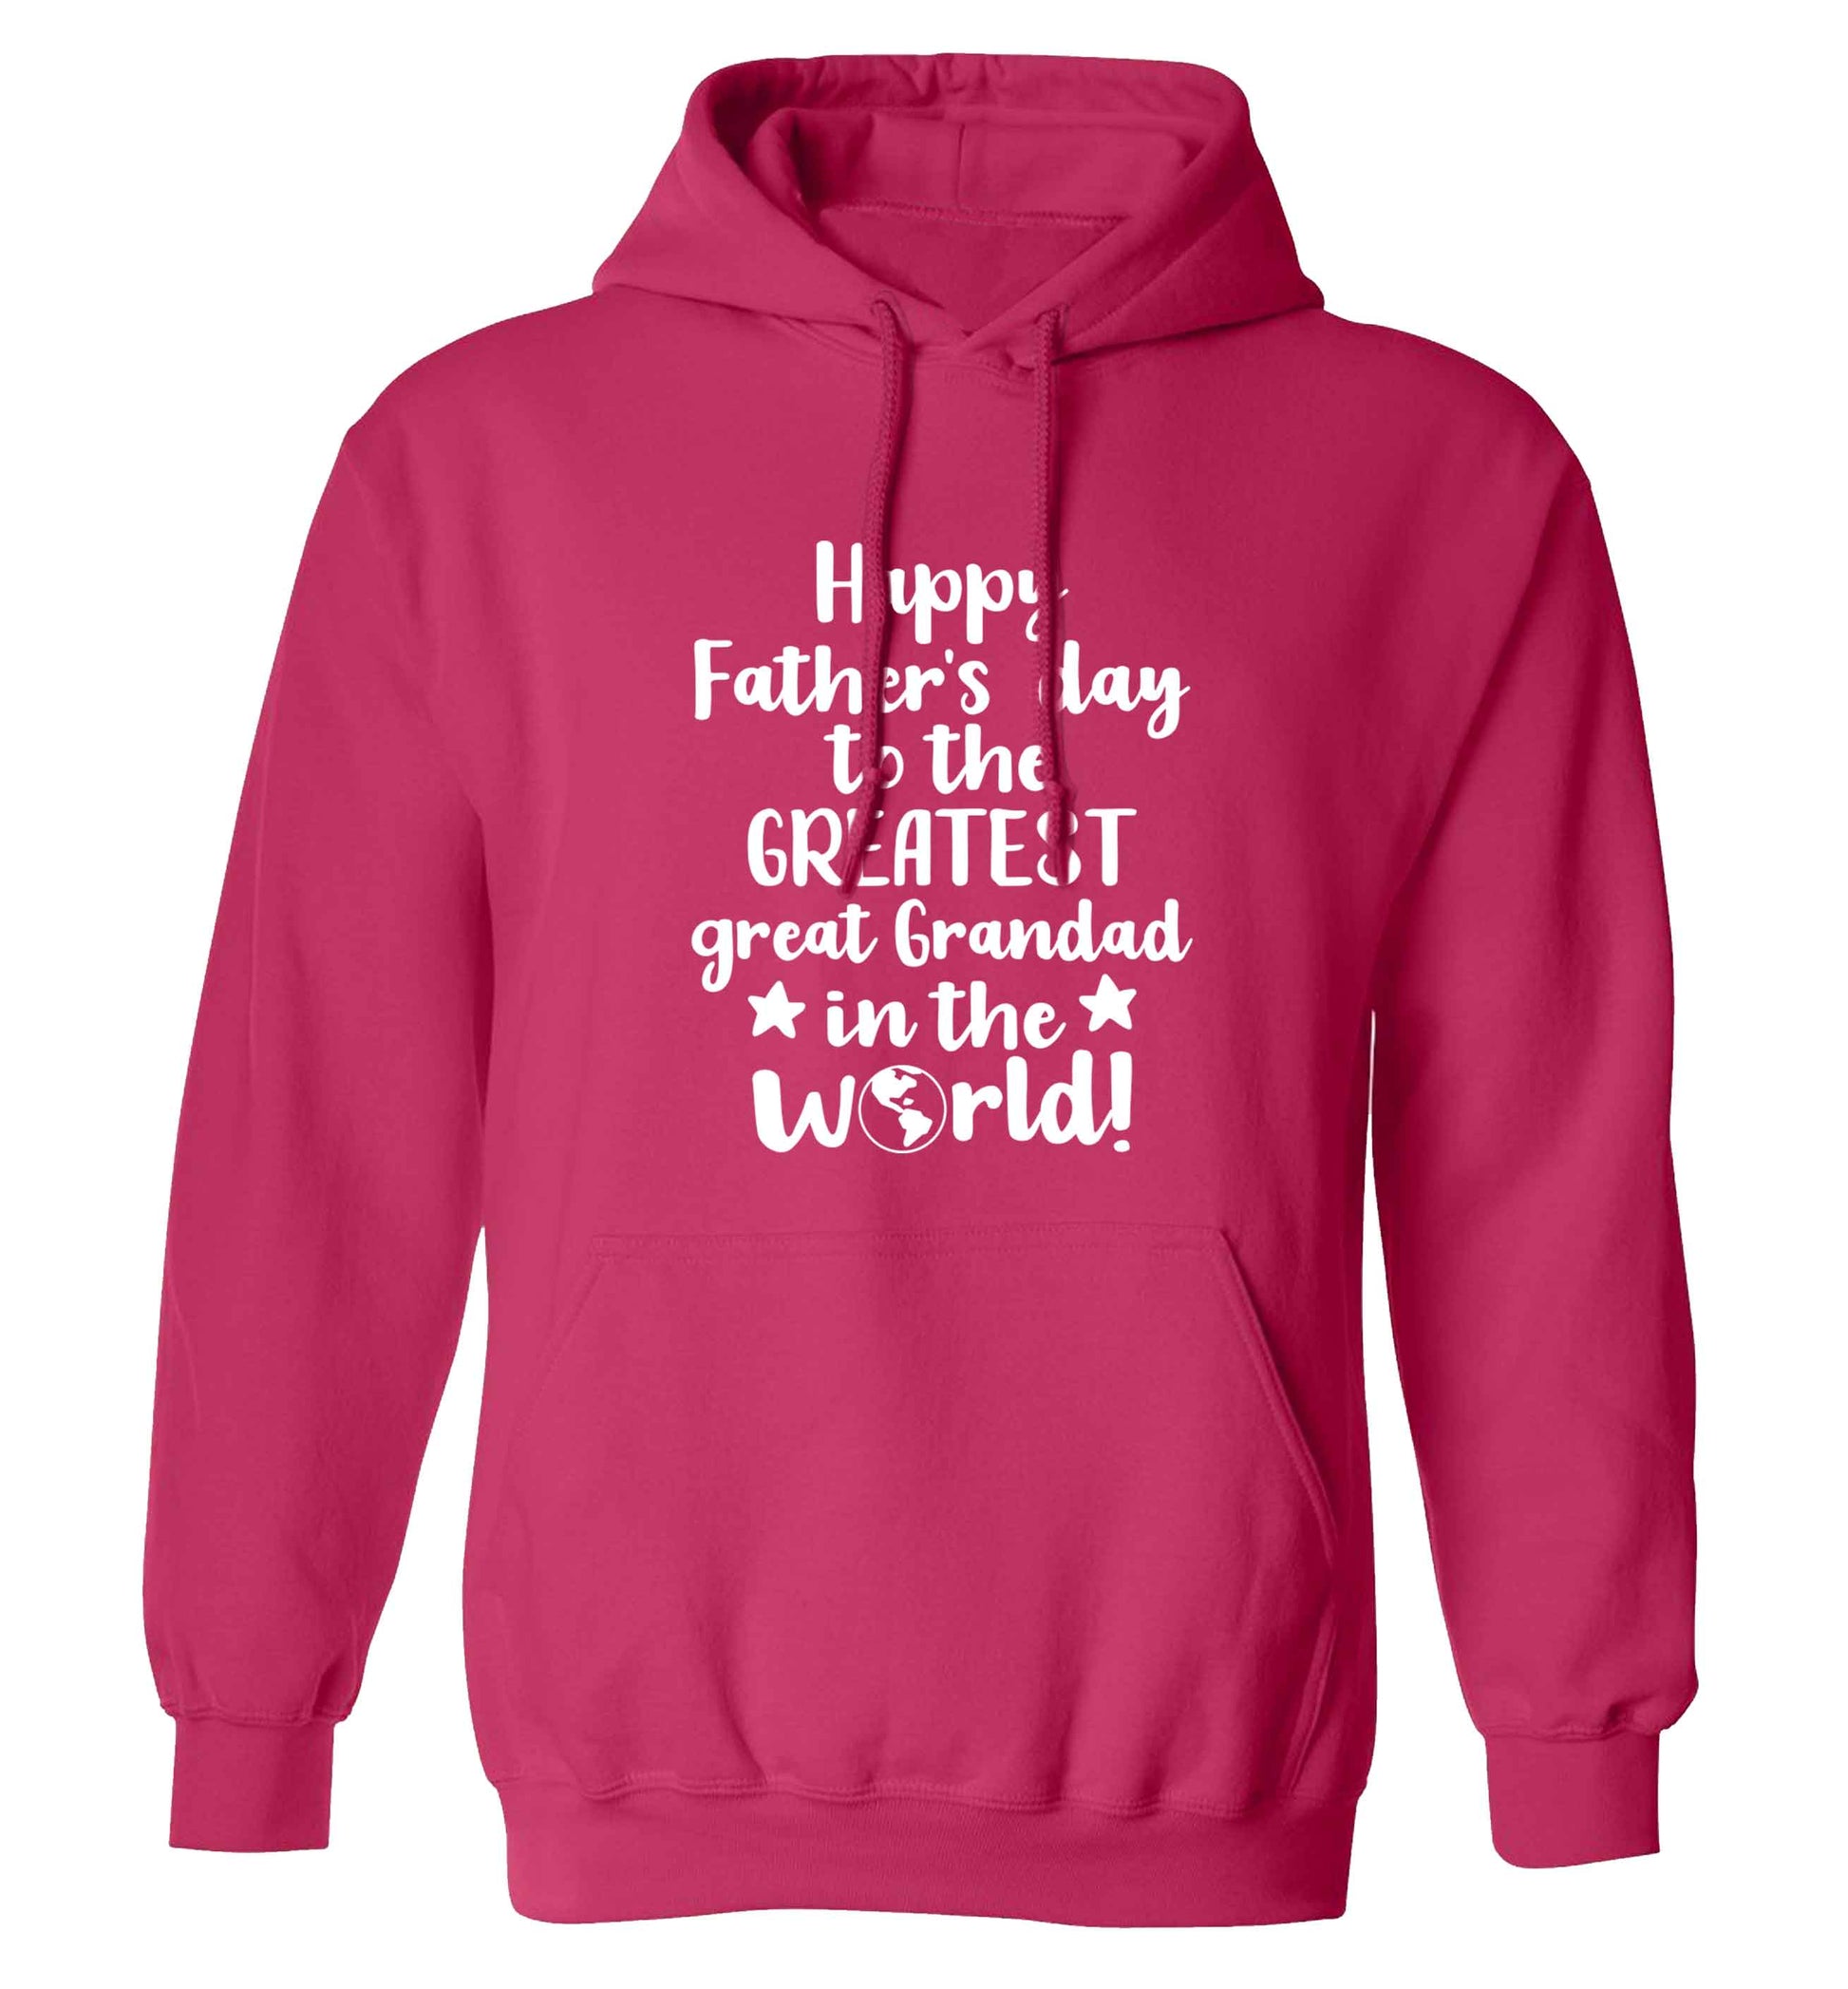 Happy Father's day to the greatest great grandad in the world adults unisex pink hoodie 2XL